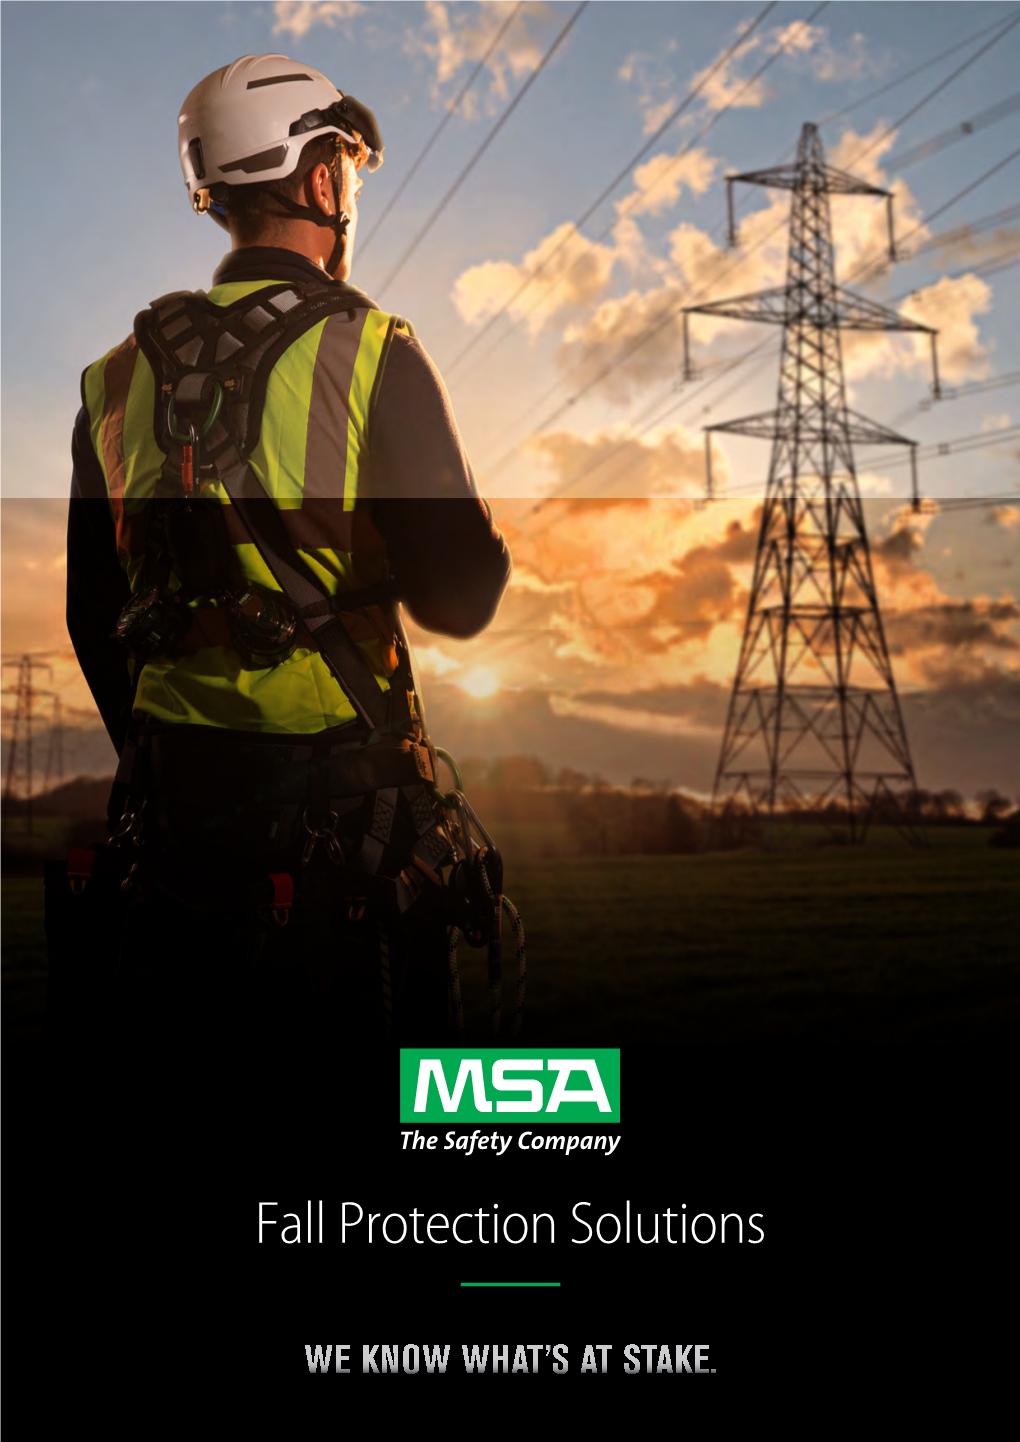 Fall Protection Solutions Fall Protection Safety Solutions